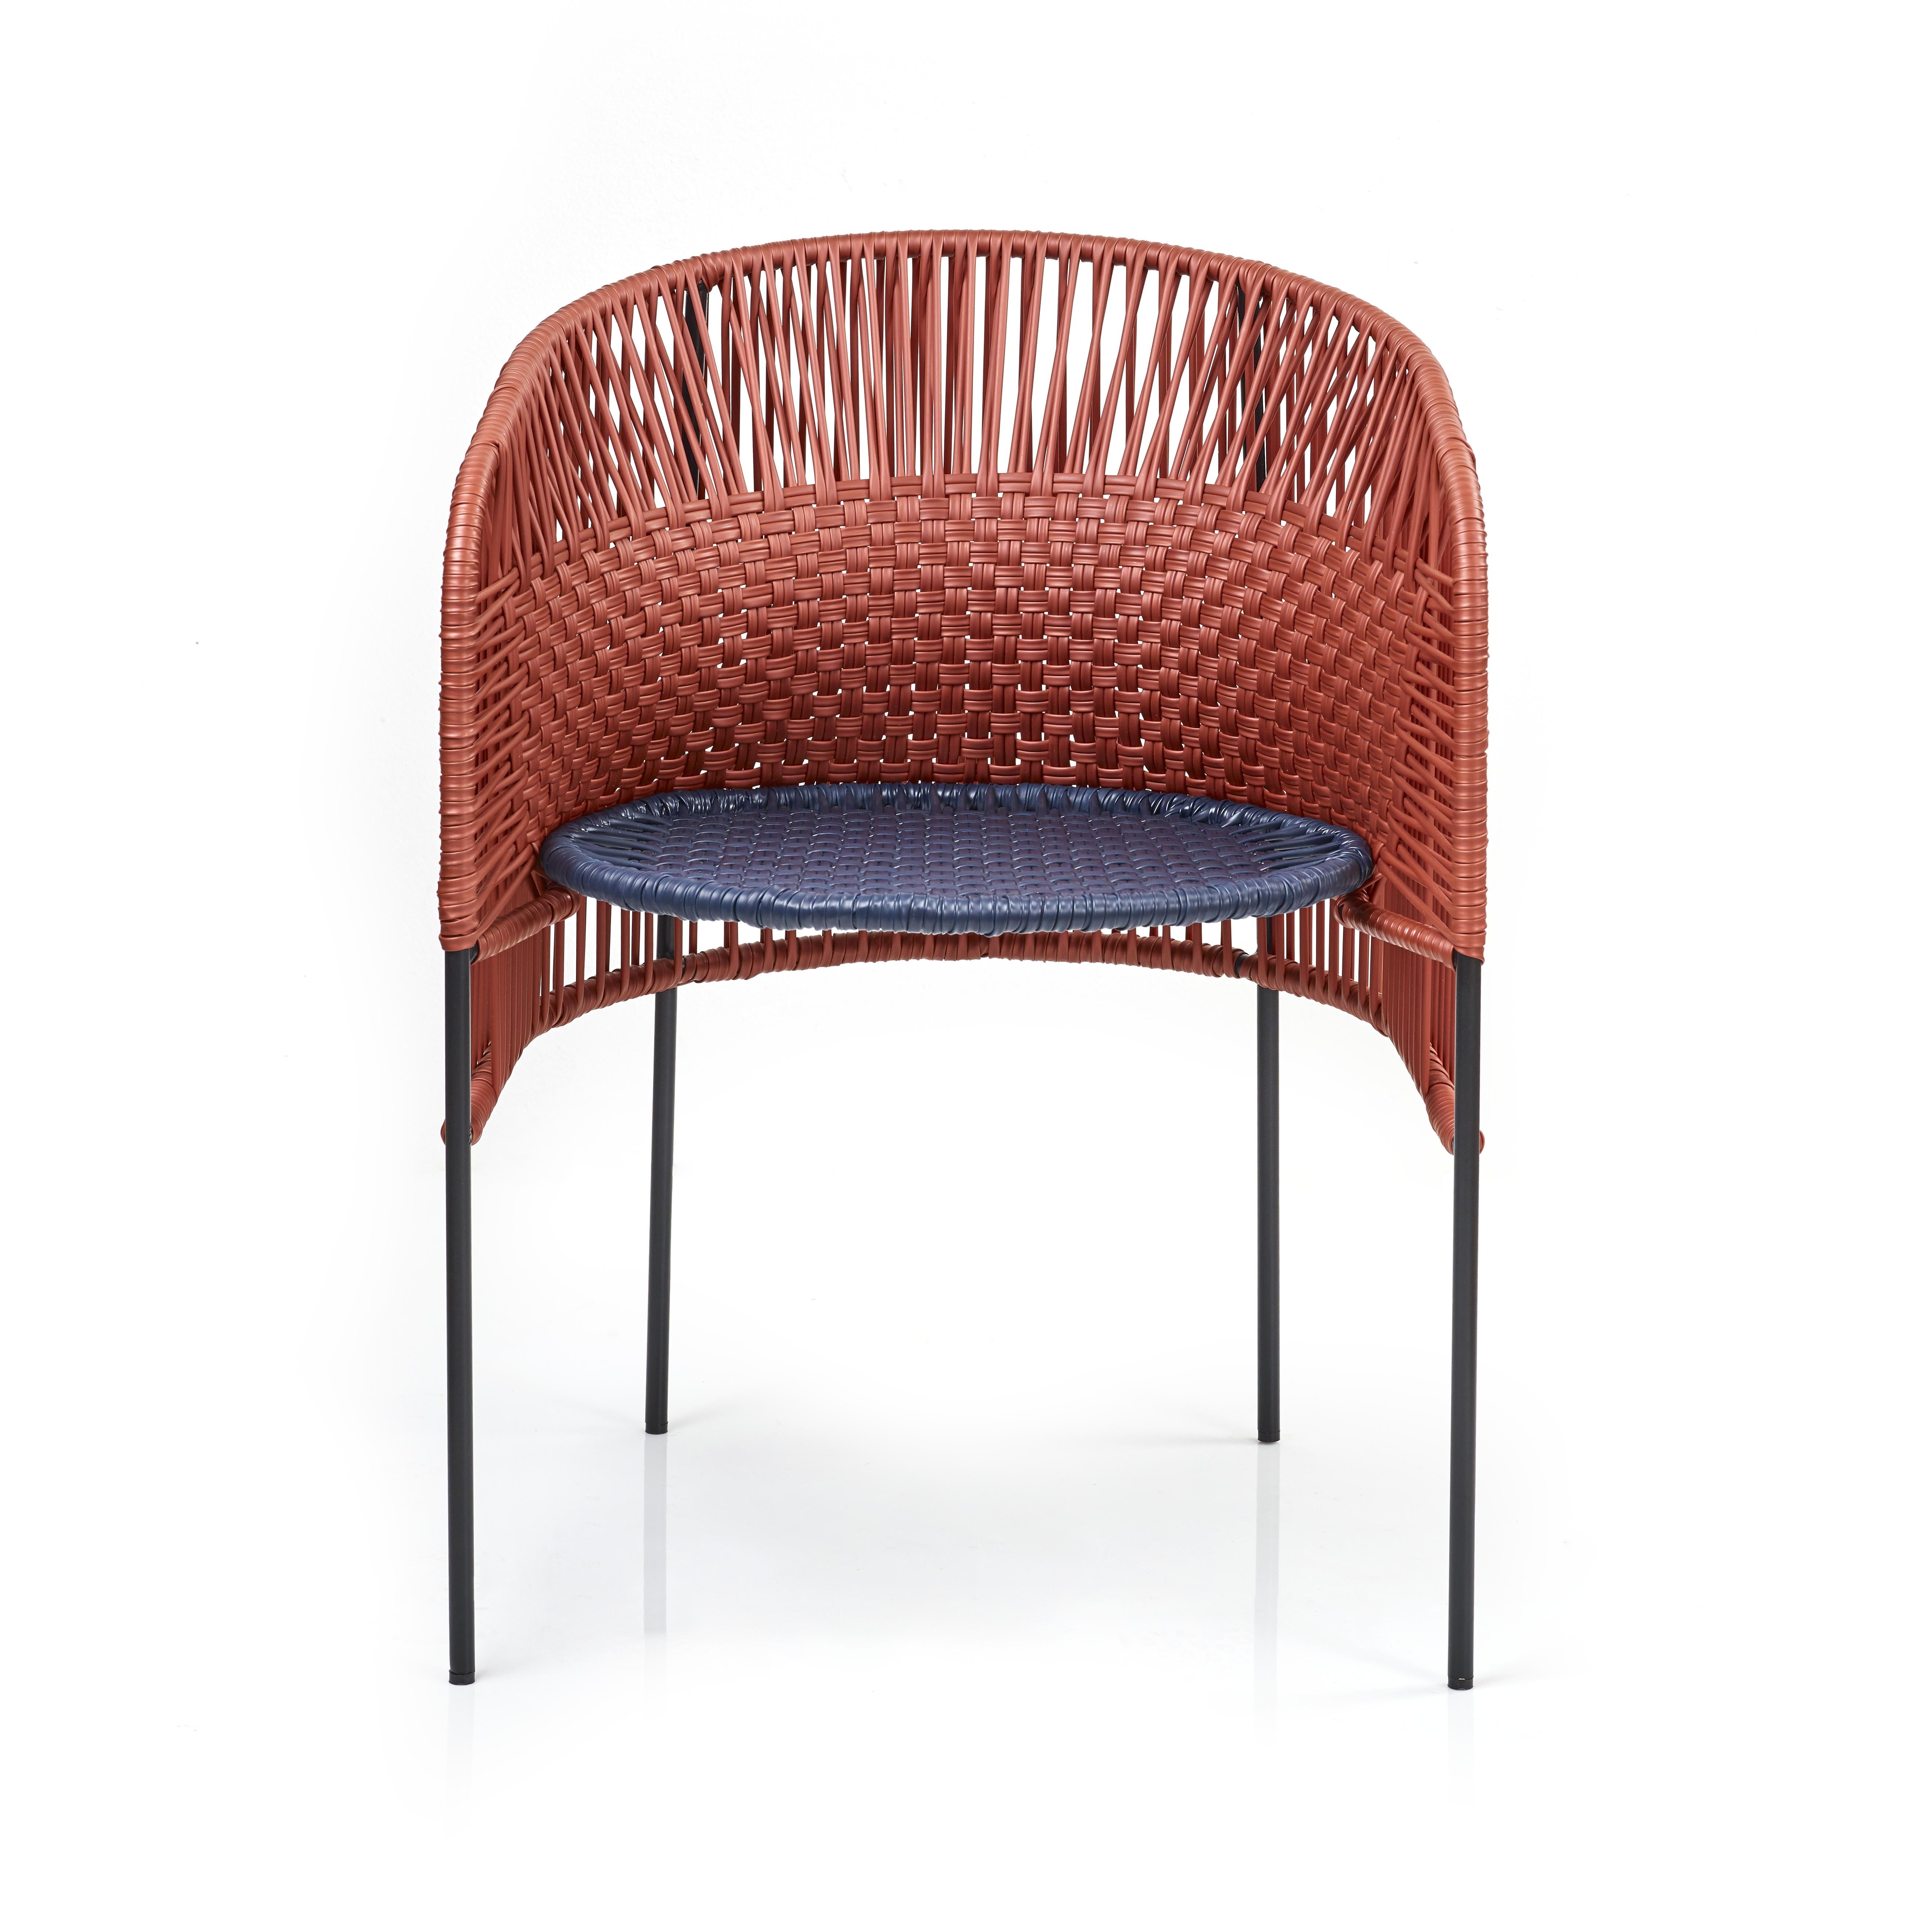 Set of 4 orange Caribe chic dining chair by Sebastian Herkner.
Materials: galvanized and powder-coated tubular steel. PVC strings are made from recycled plastic.
Technique: made from recycled plastic and weaved by local craftspeople in Colombia.